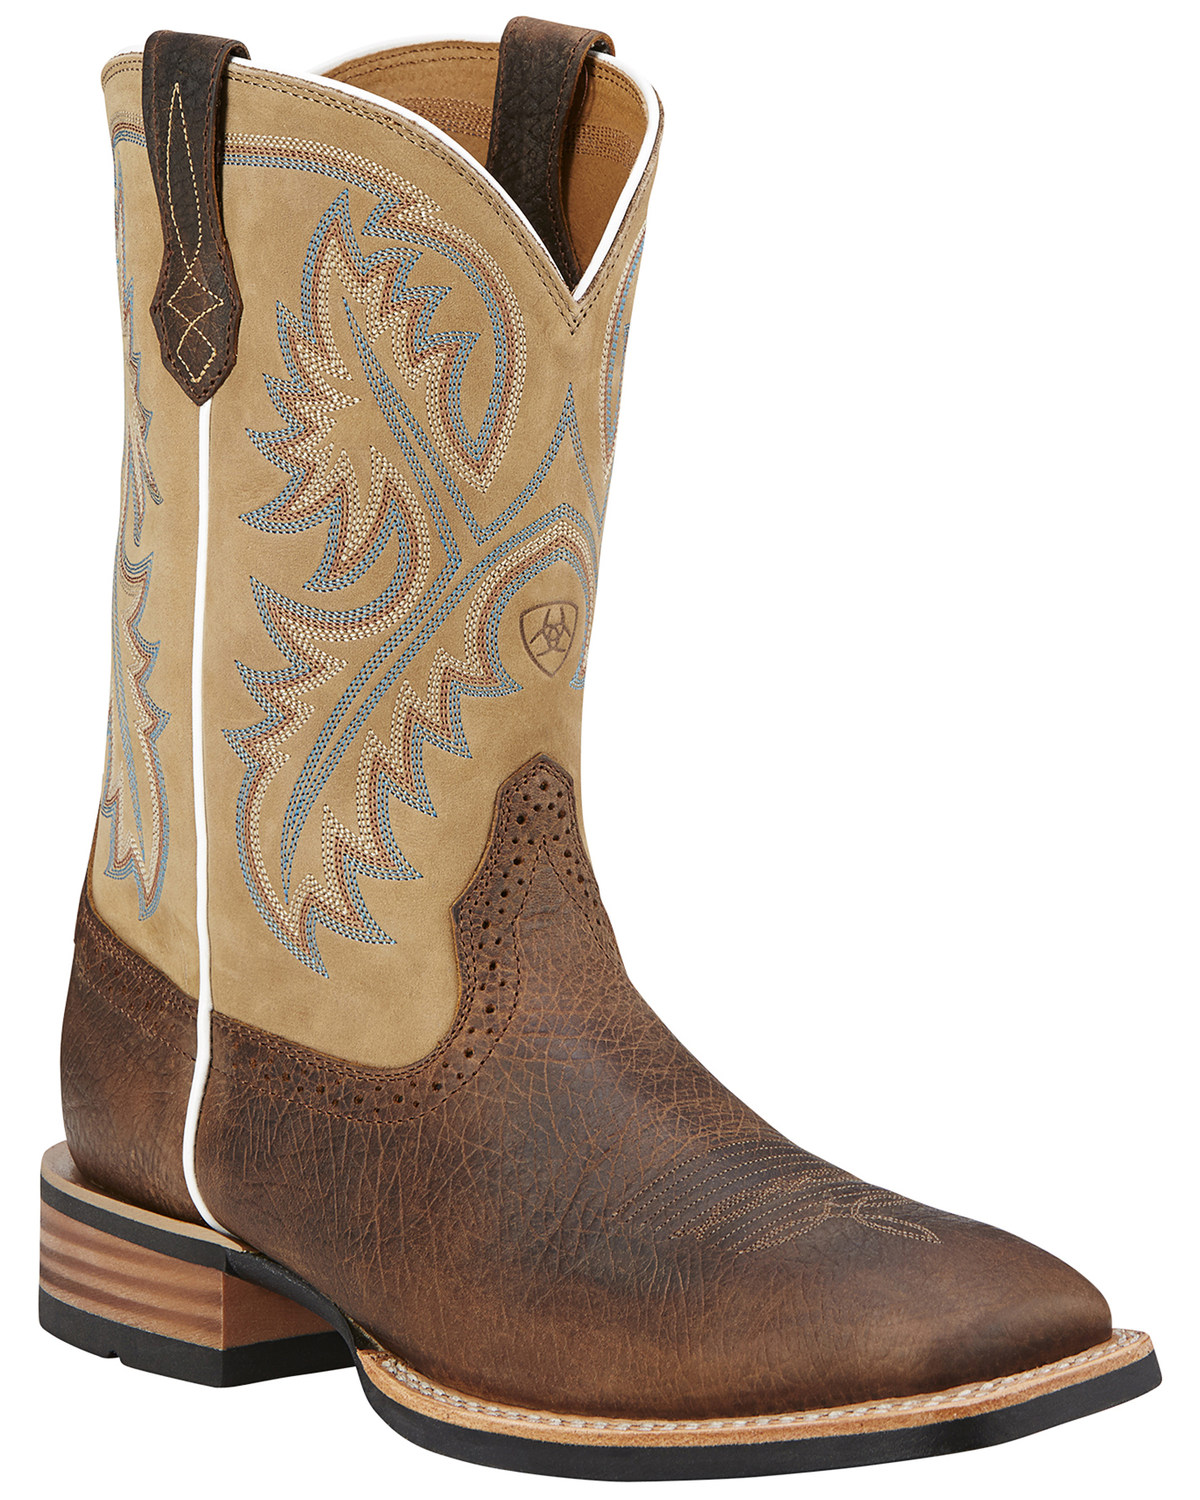 Ariat Men's Quickdraw 11" Western Performance Boots - Broad Square Toe